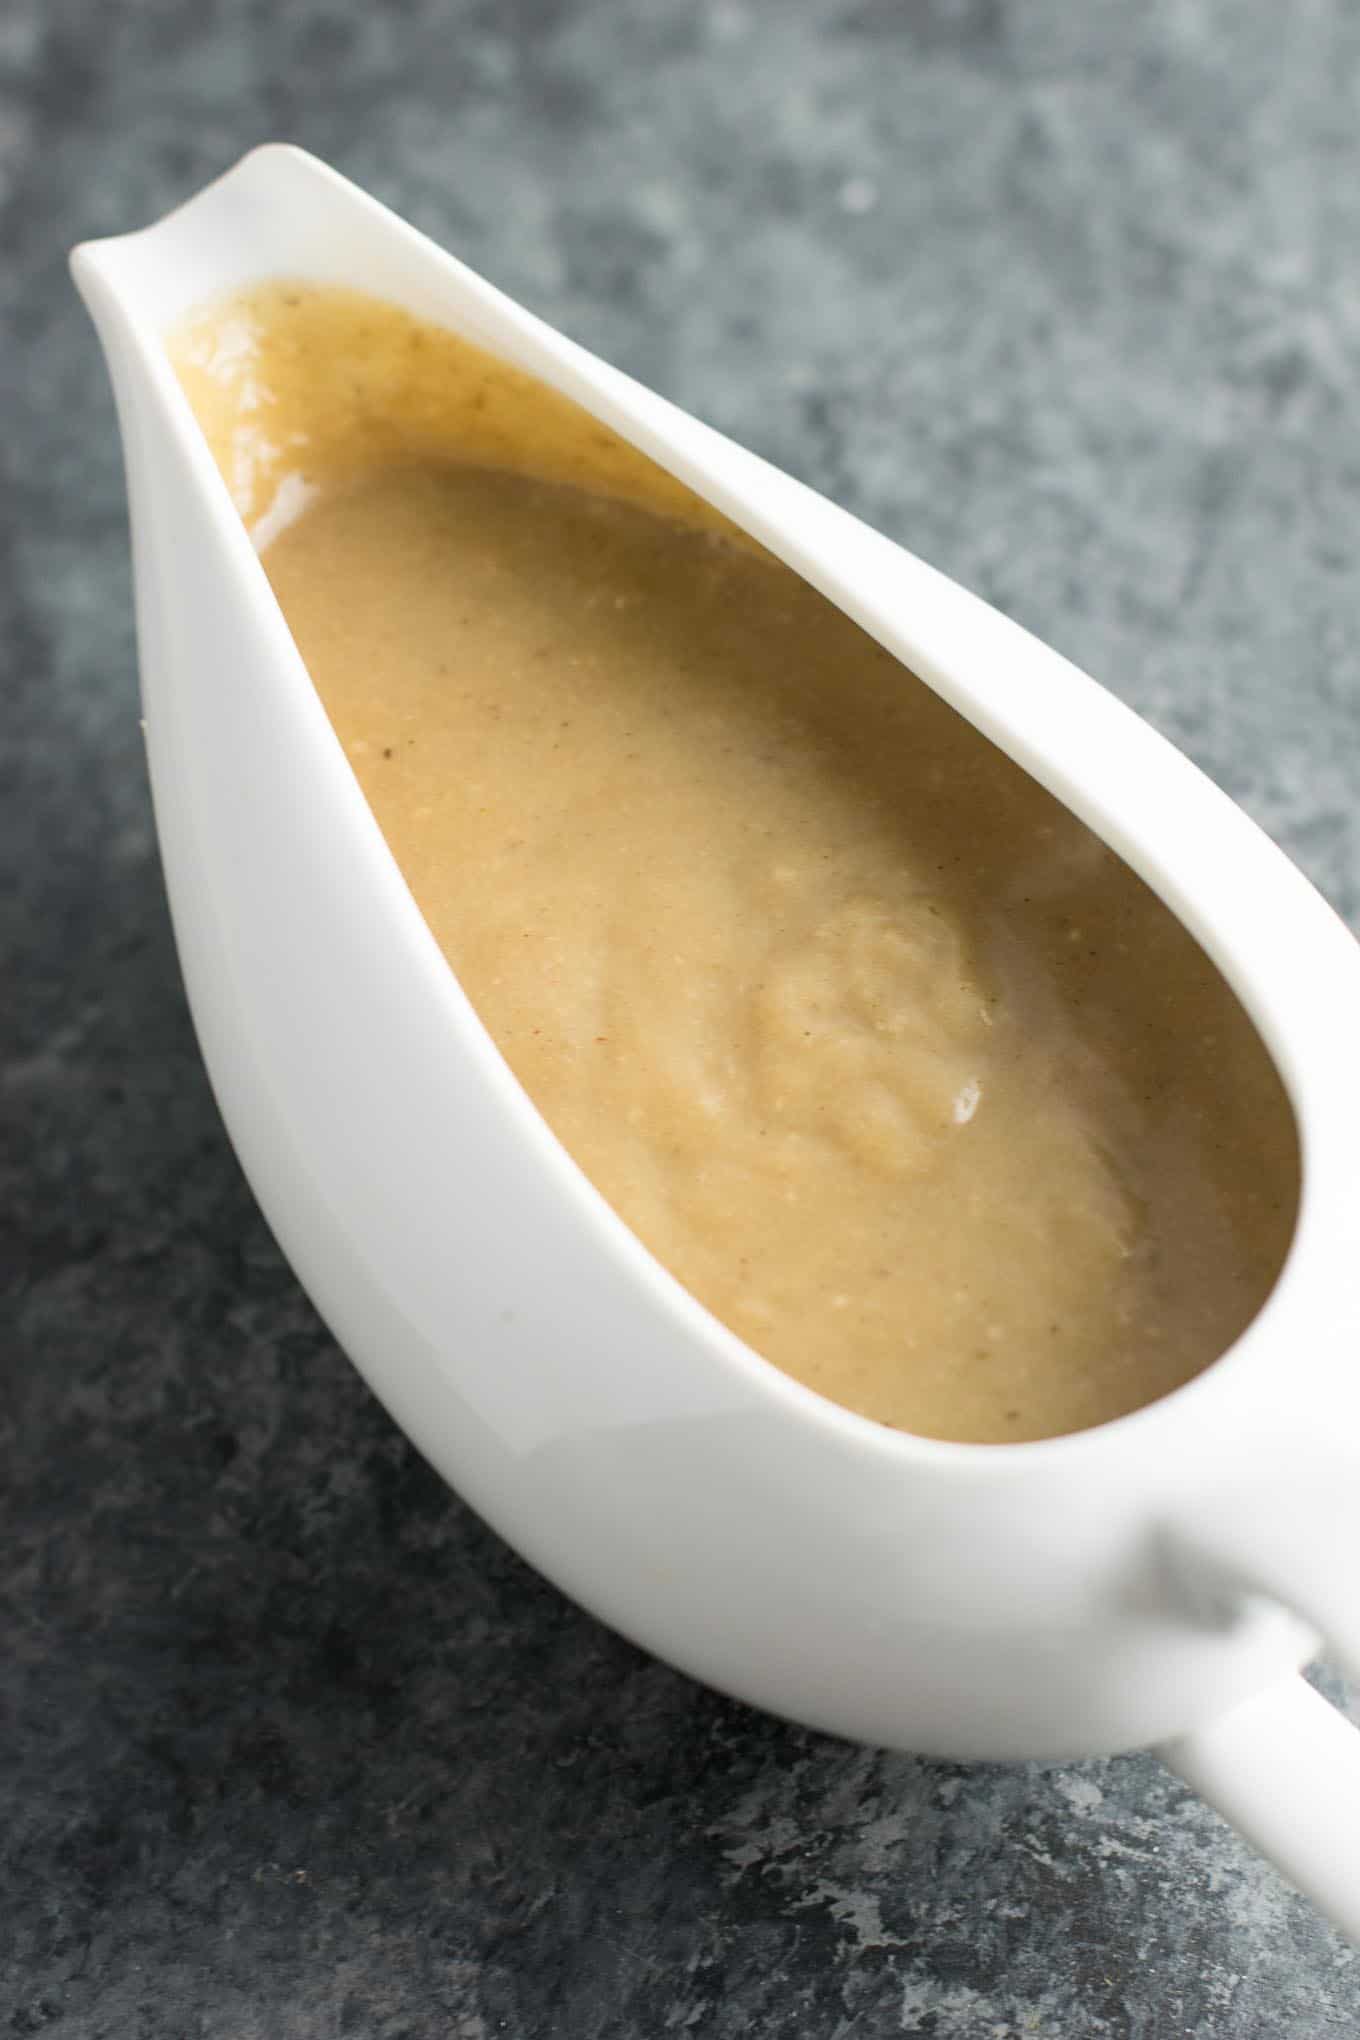 the BEST vegetarian gravy recipe made "meaty" with baby bella mushrooms, fresh garlic, and onions. Everyone will go crazy for this meatless gravy! (gluten free option included) #vegetariangravy #gravy #thanksgiving